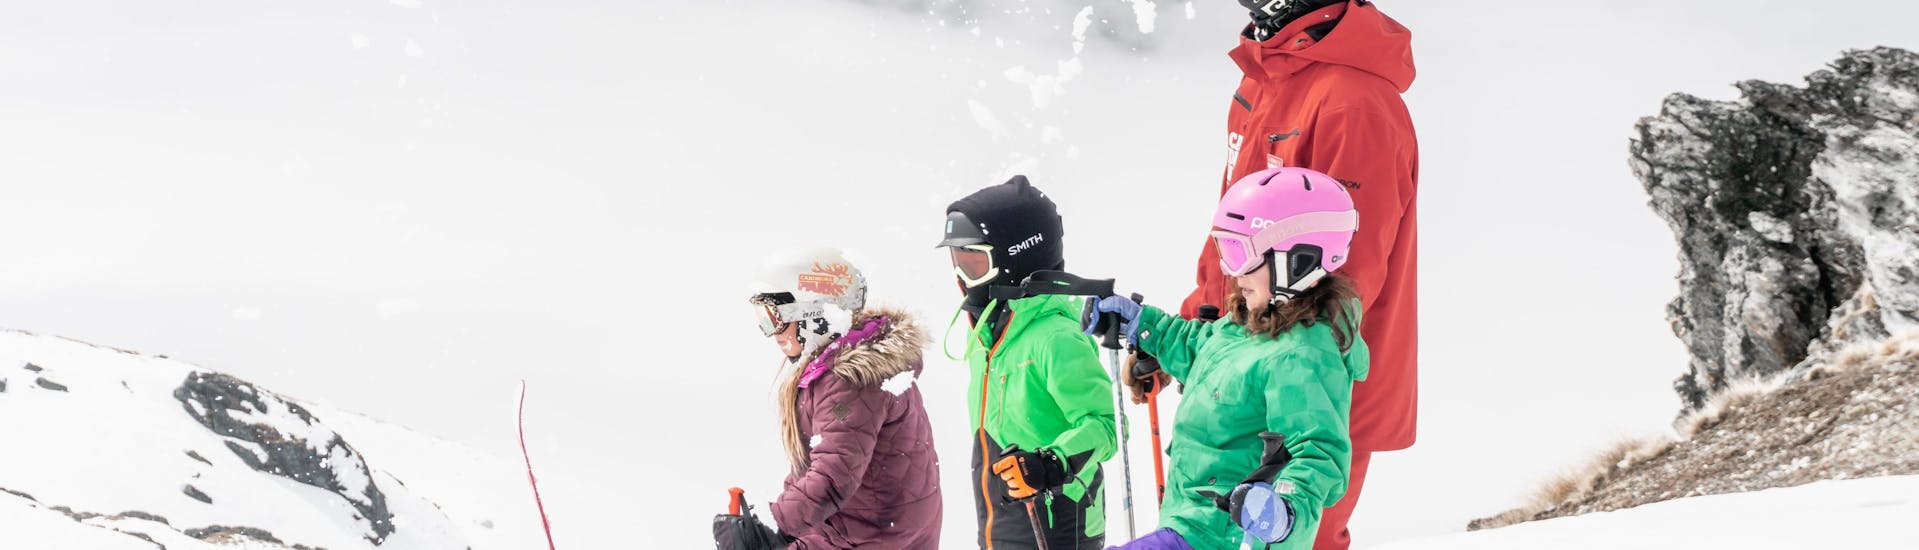 Kids Ski Lessons (5-17 years) - All Levels.